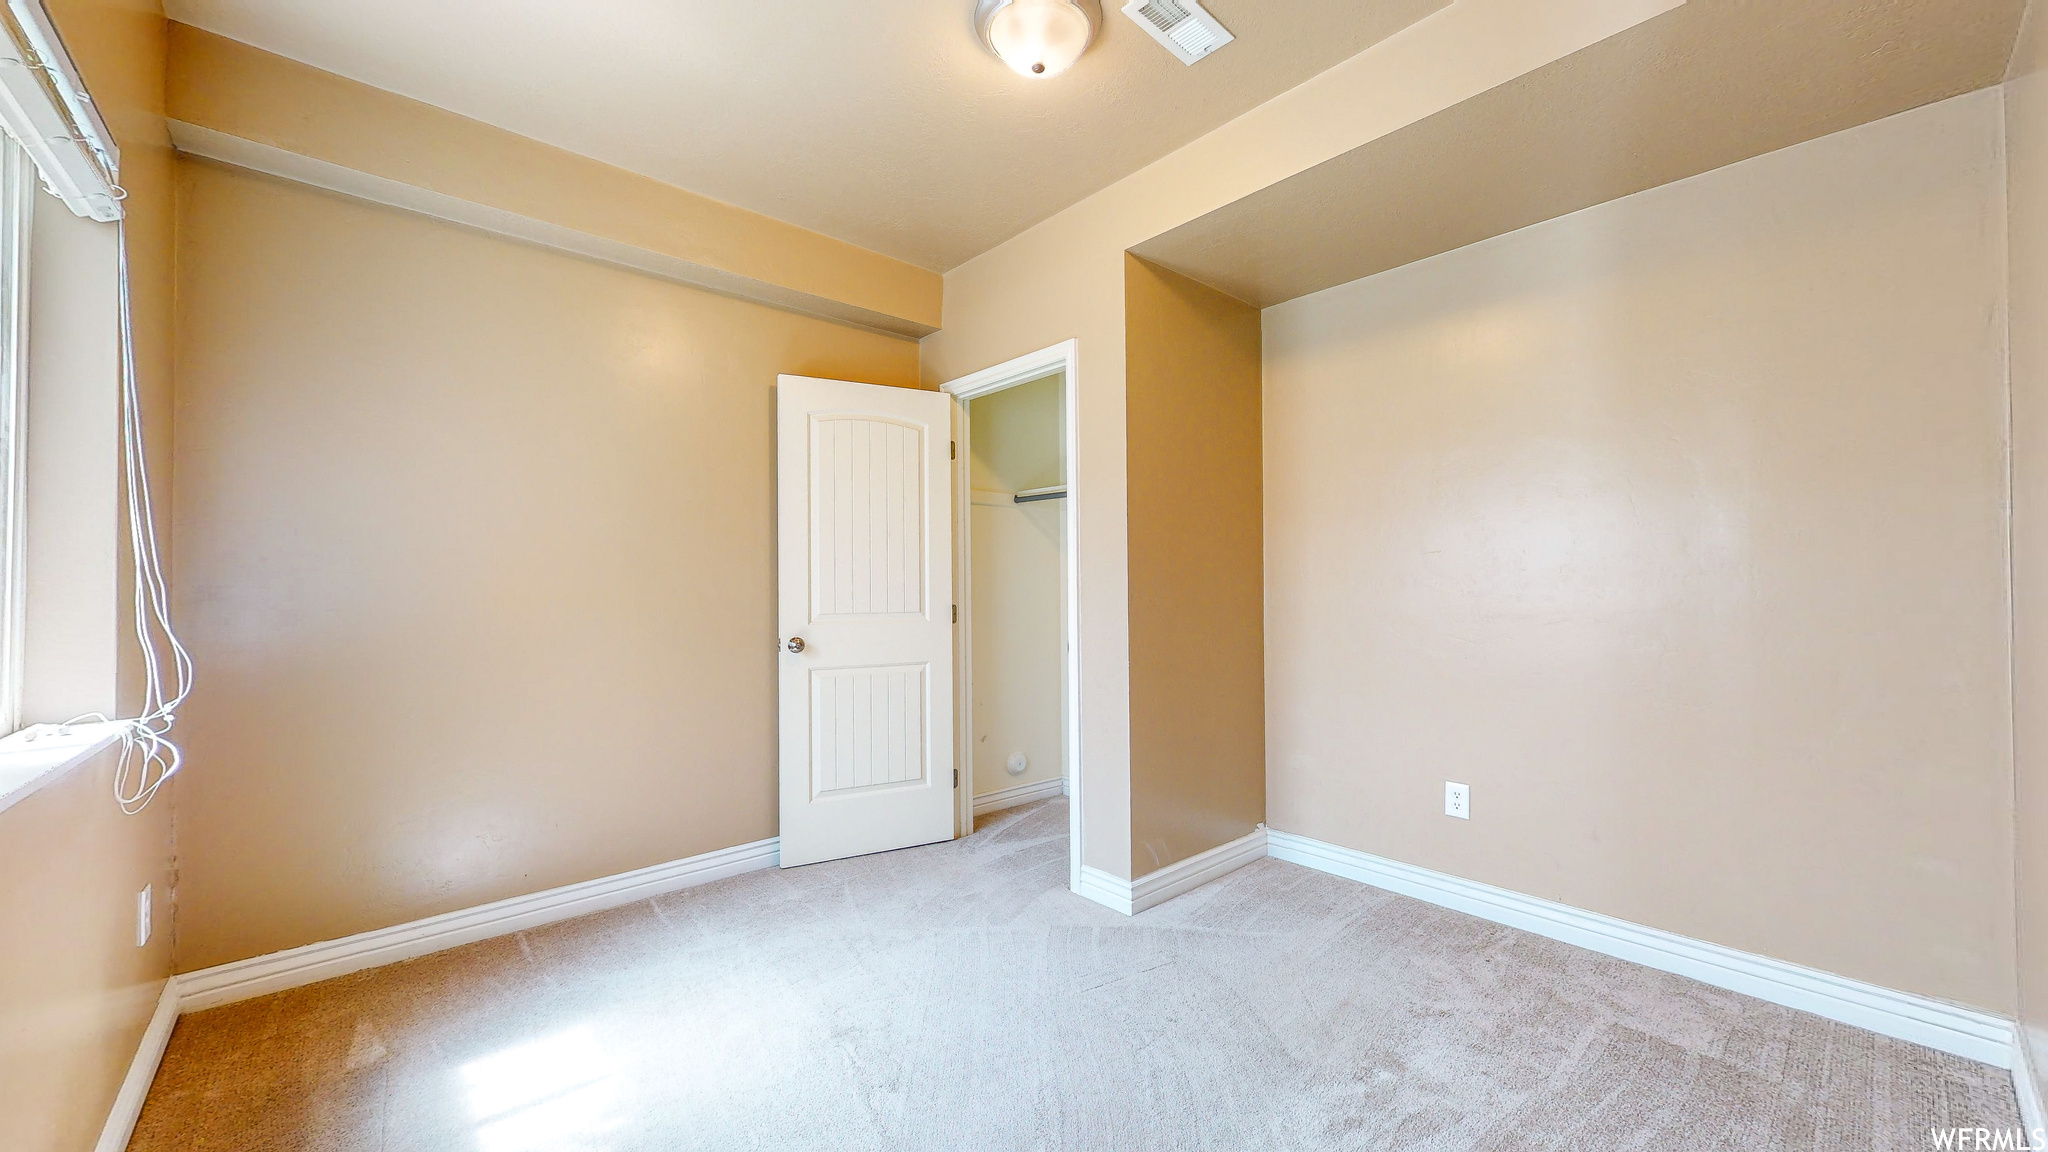 Basement bedroom with a closet and light colored carpet